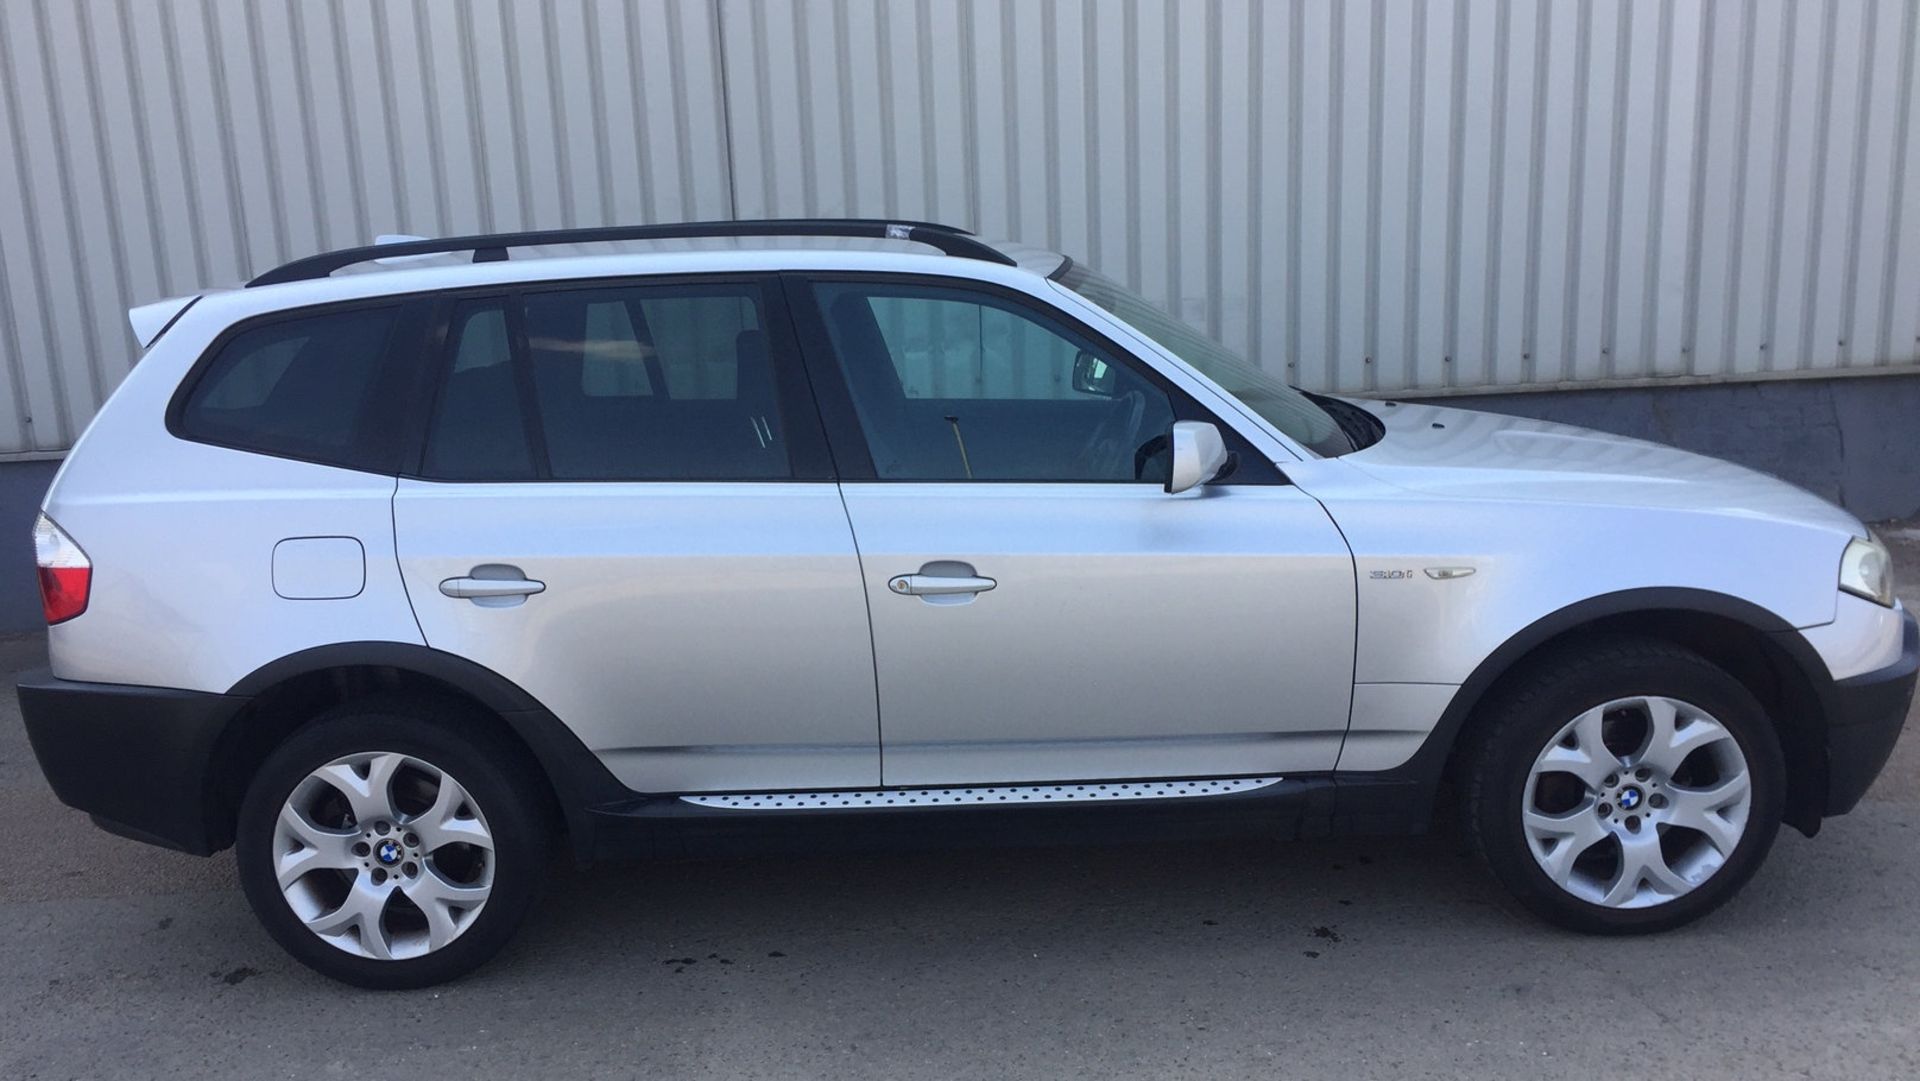 2005 BMW X3 3.0 Sport Auto 5 Dr 4x4 - CL505 - NO VAT ON THE HAMMER - Location: Corby, Northamptonshi - Image 2 of 16